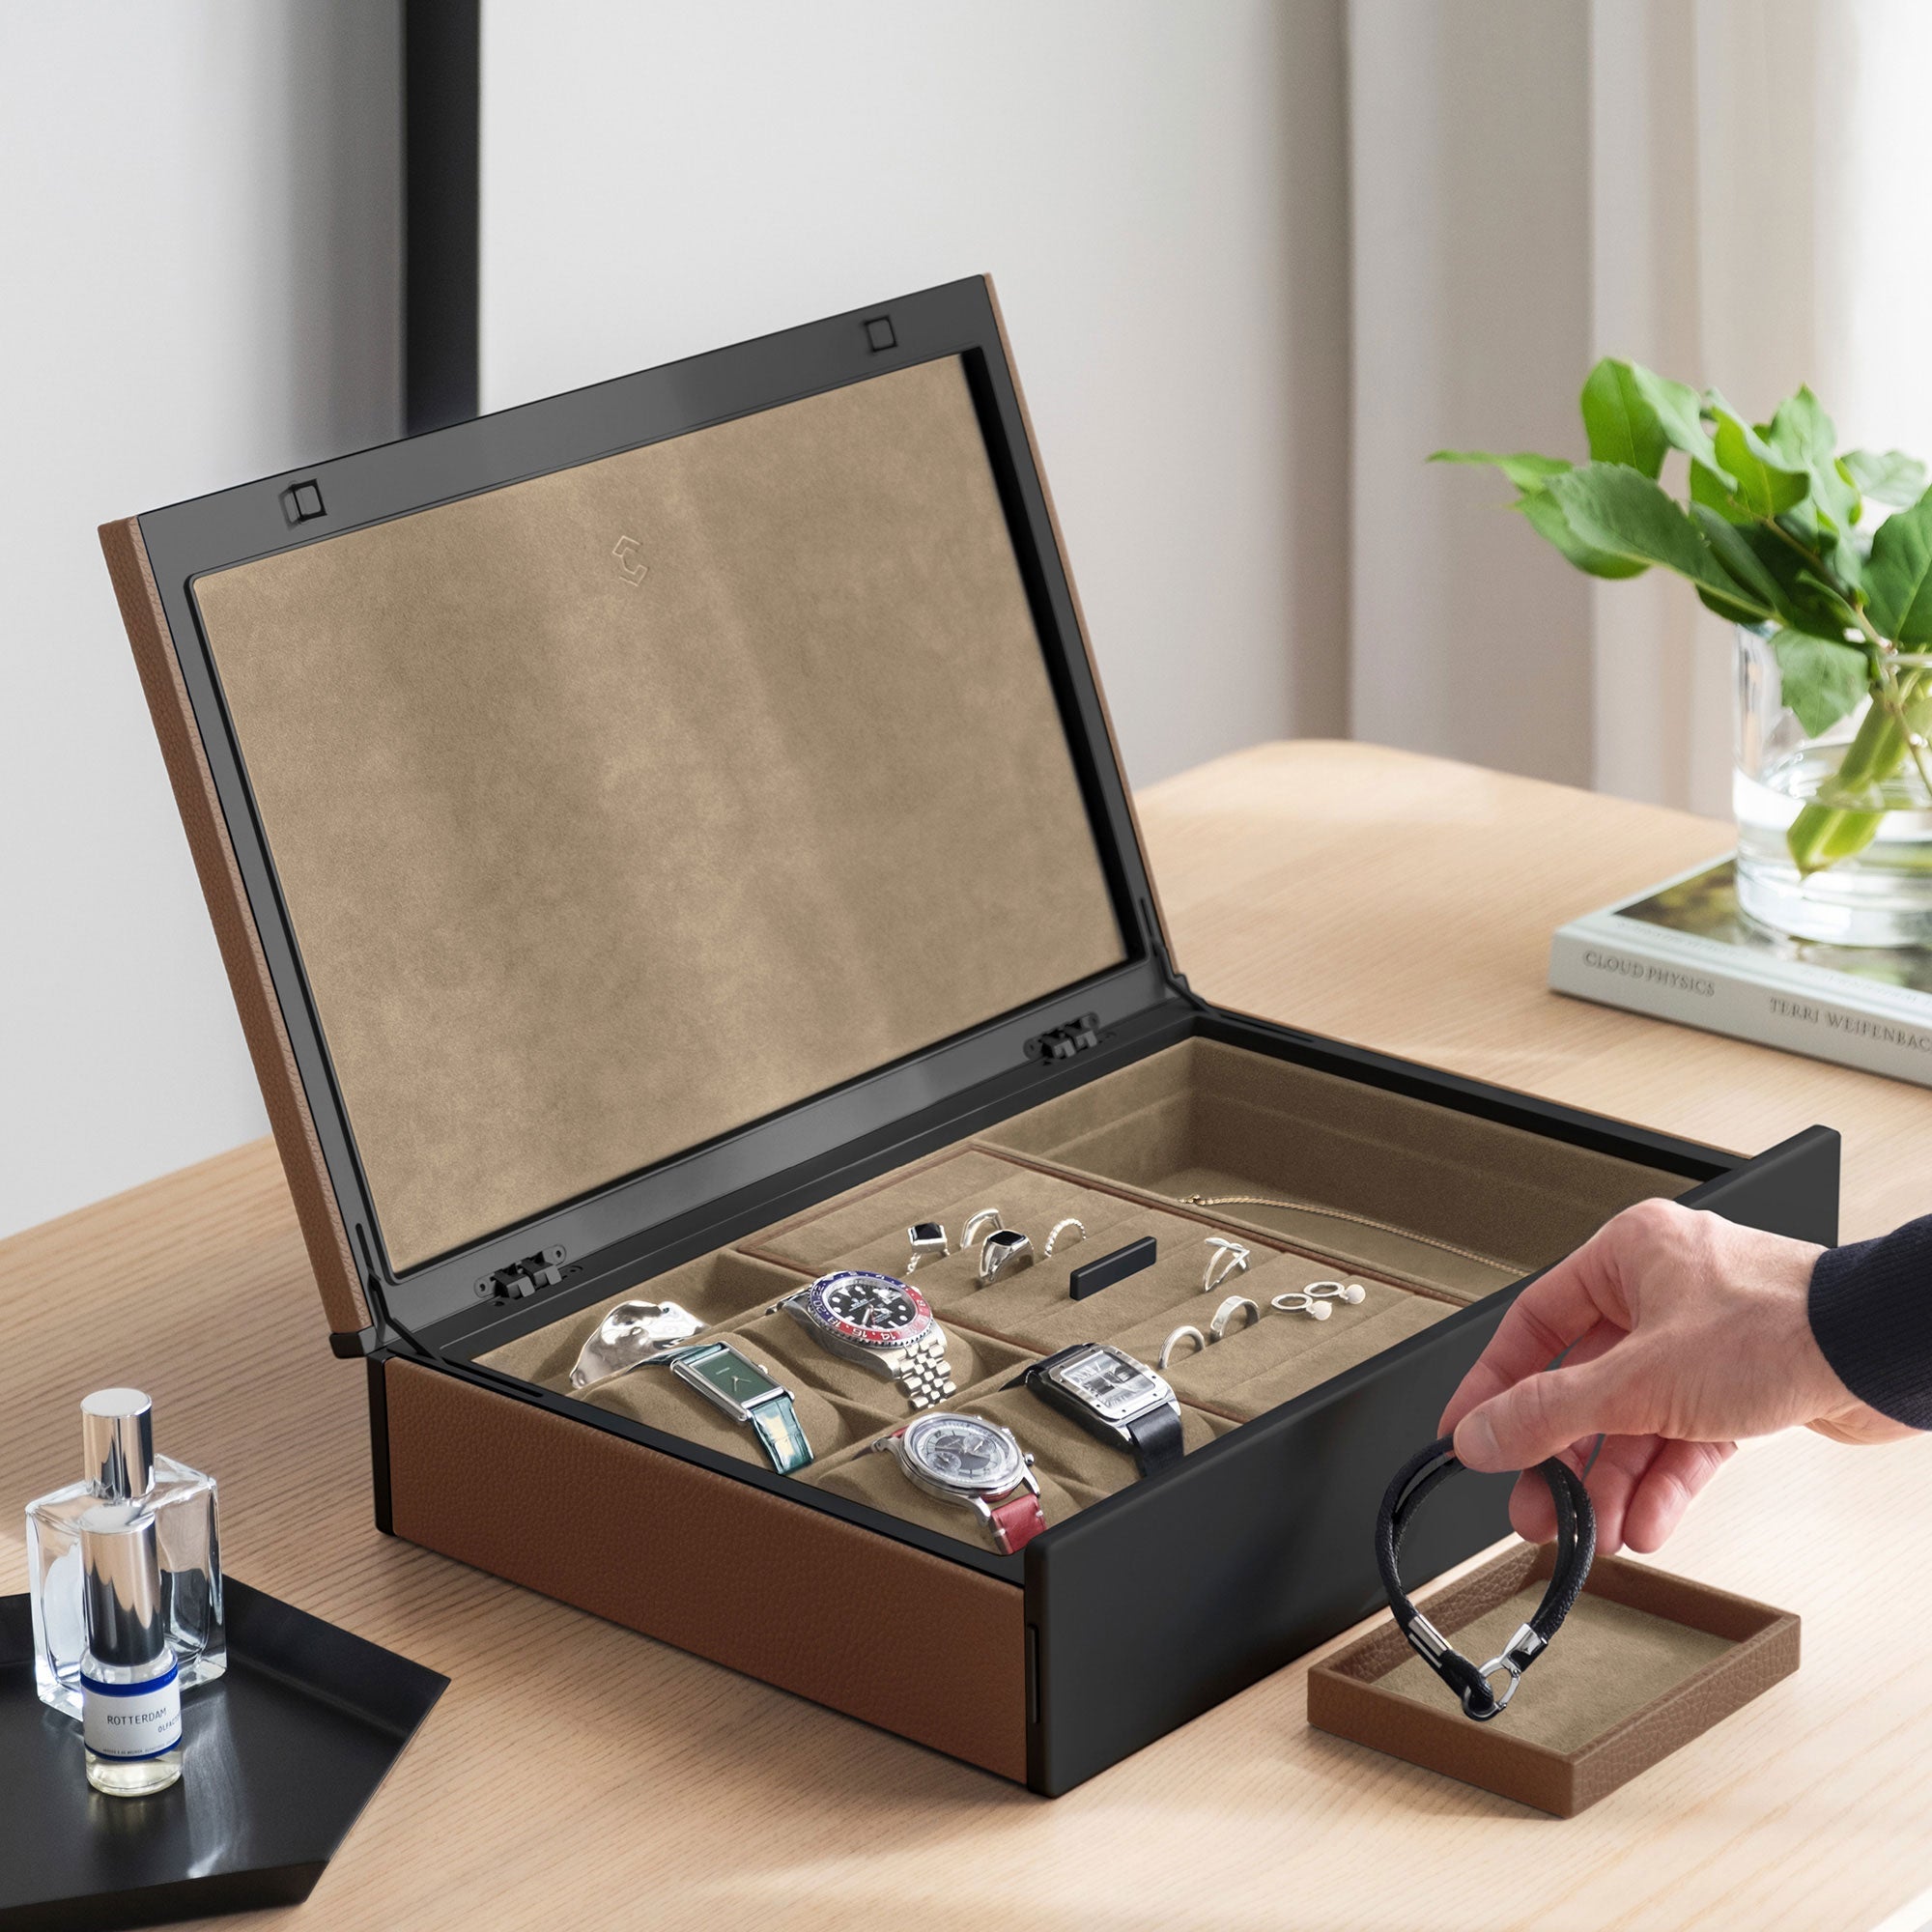 Lifestyle photo of man grabbing bracelet from the jewelry tray of the Taylor 4 Watch and Jewelry box in tan leather, black carbon fiber and anodized aluminum casing and camel interior. The jewelry organization and watch storage box is holding 4 luxury watches and a collection of rings, earrings and necklaces.